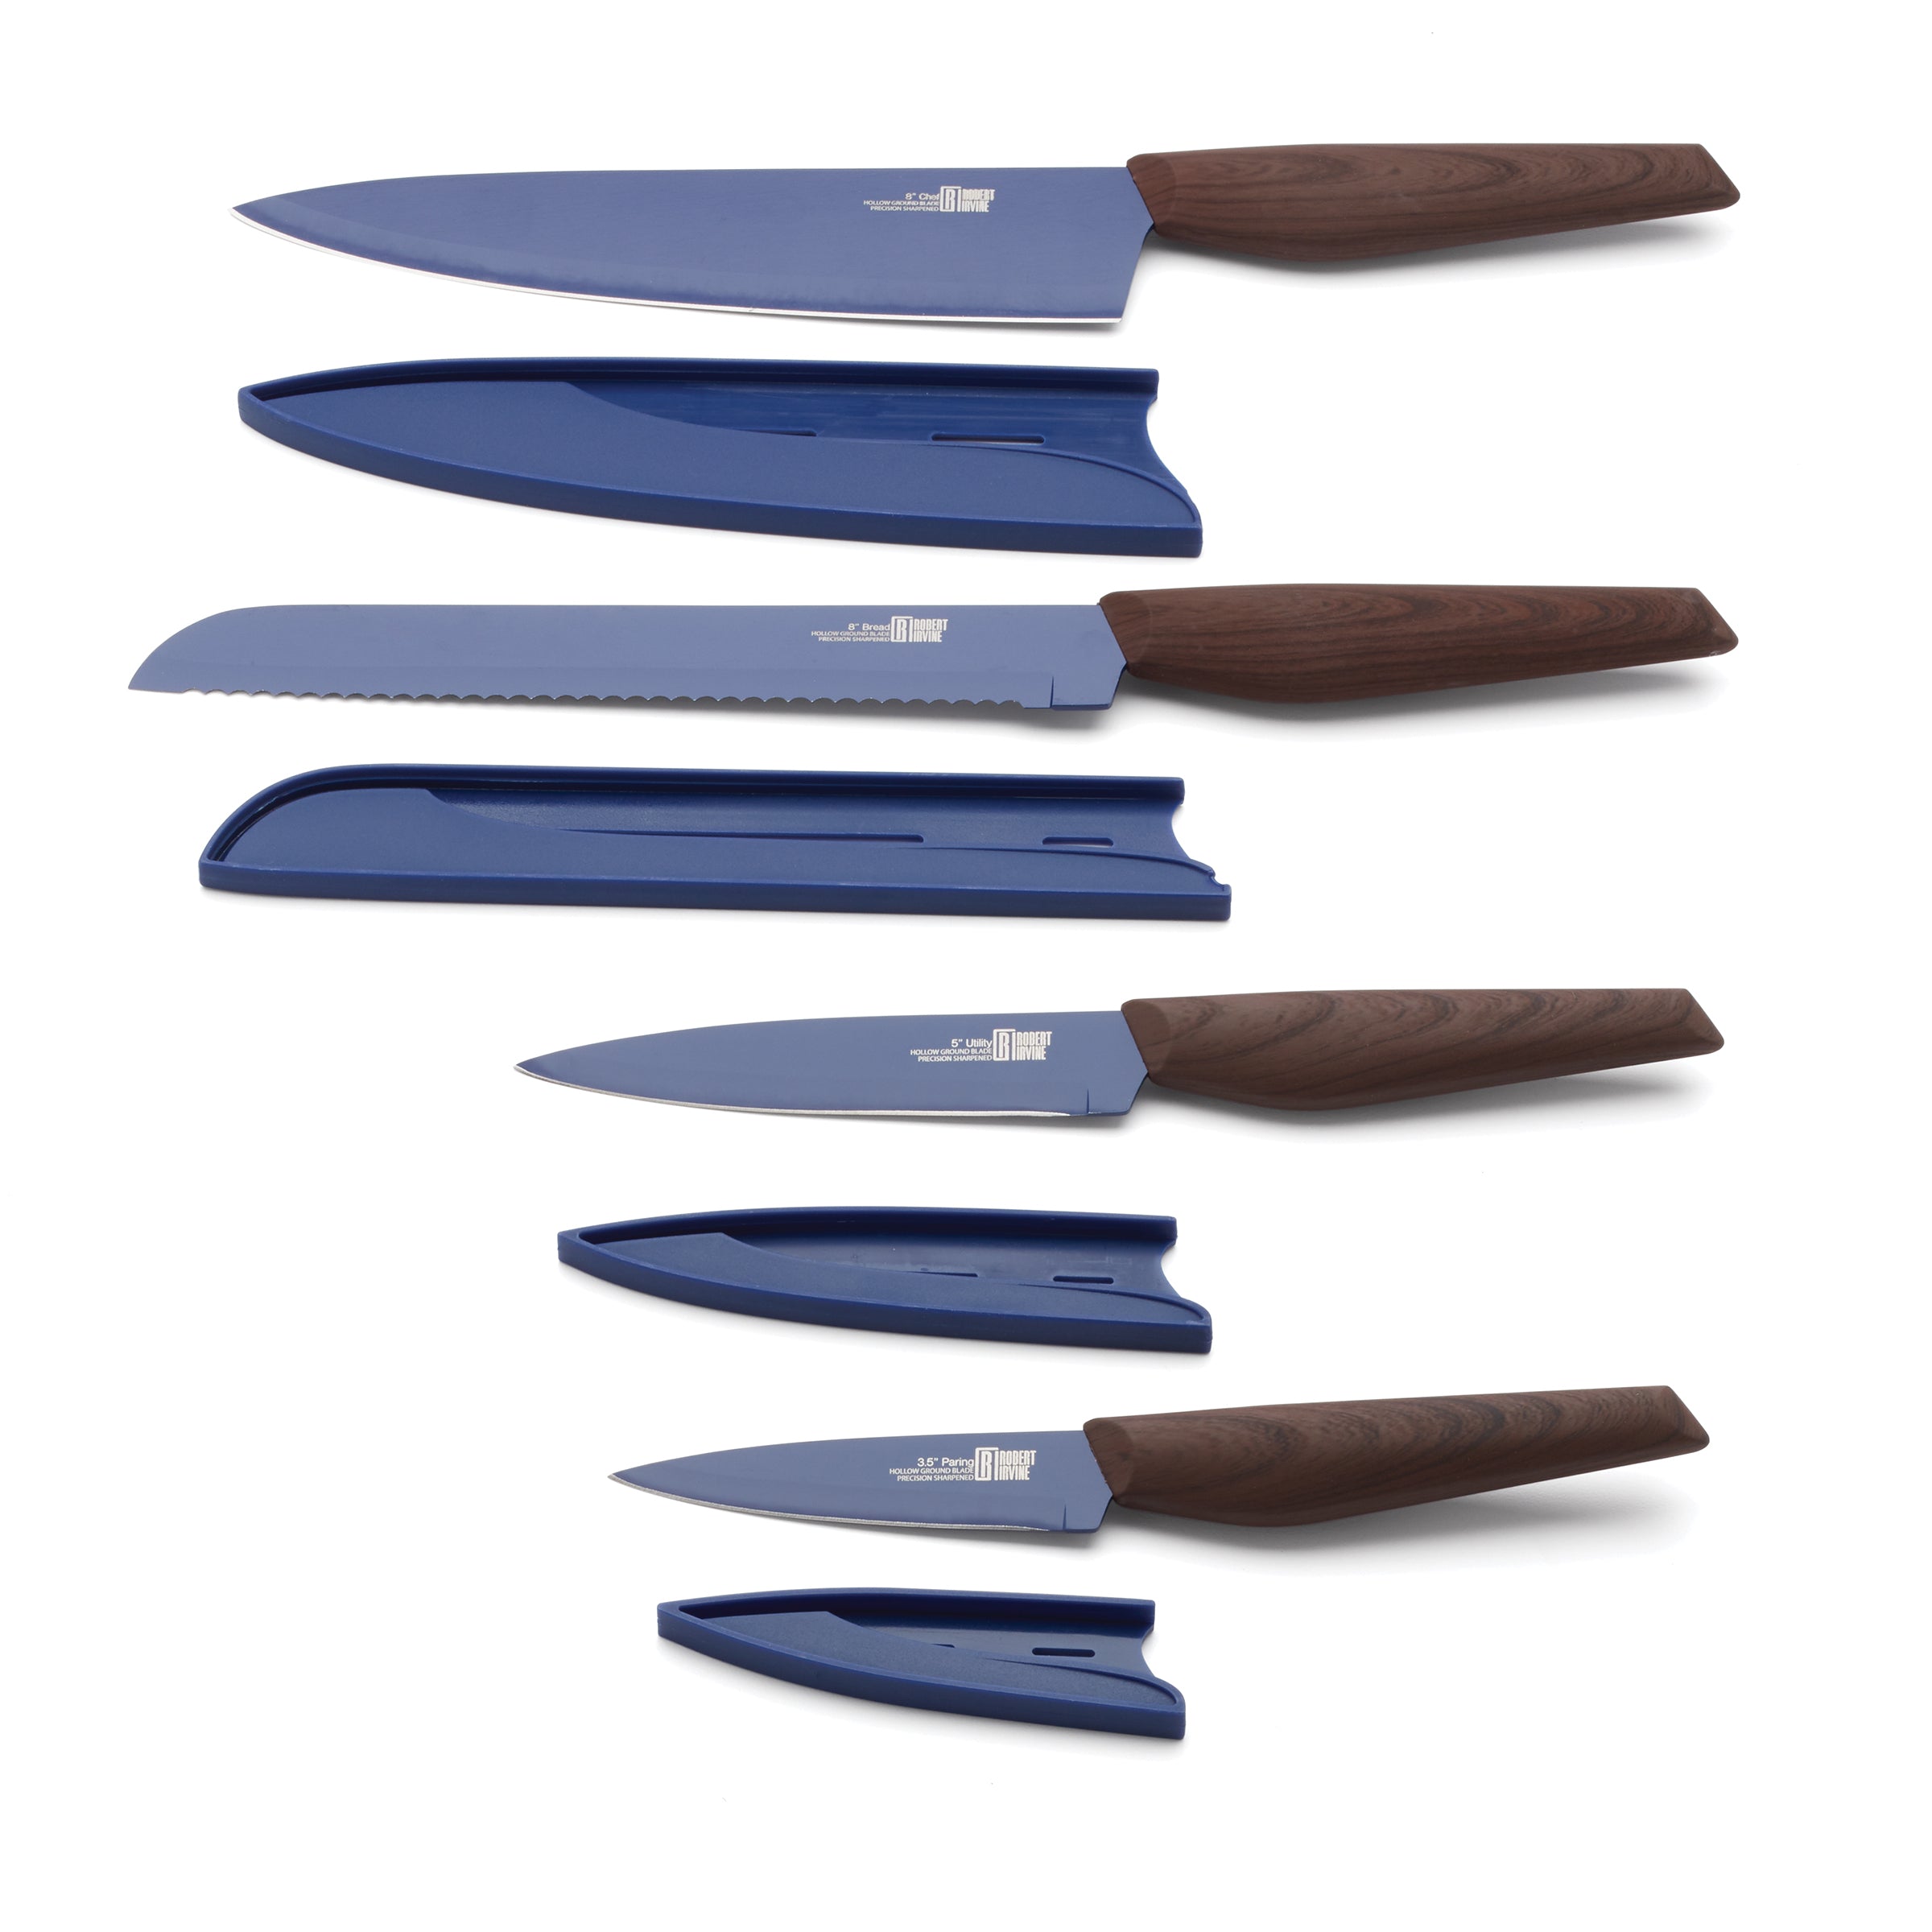 Berghoff Ron Cutlery Knives, Set of 3